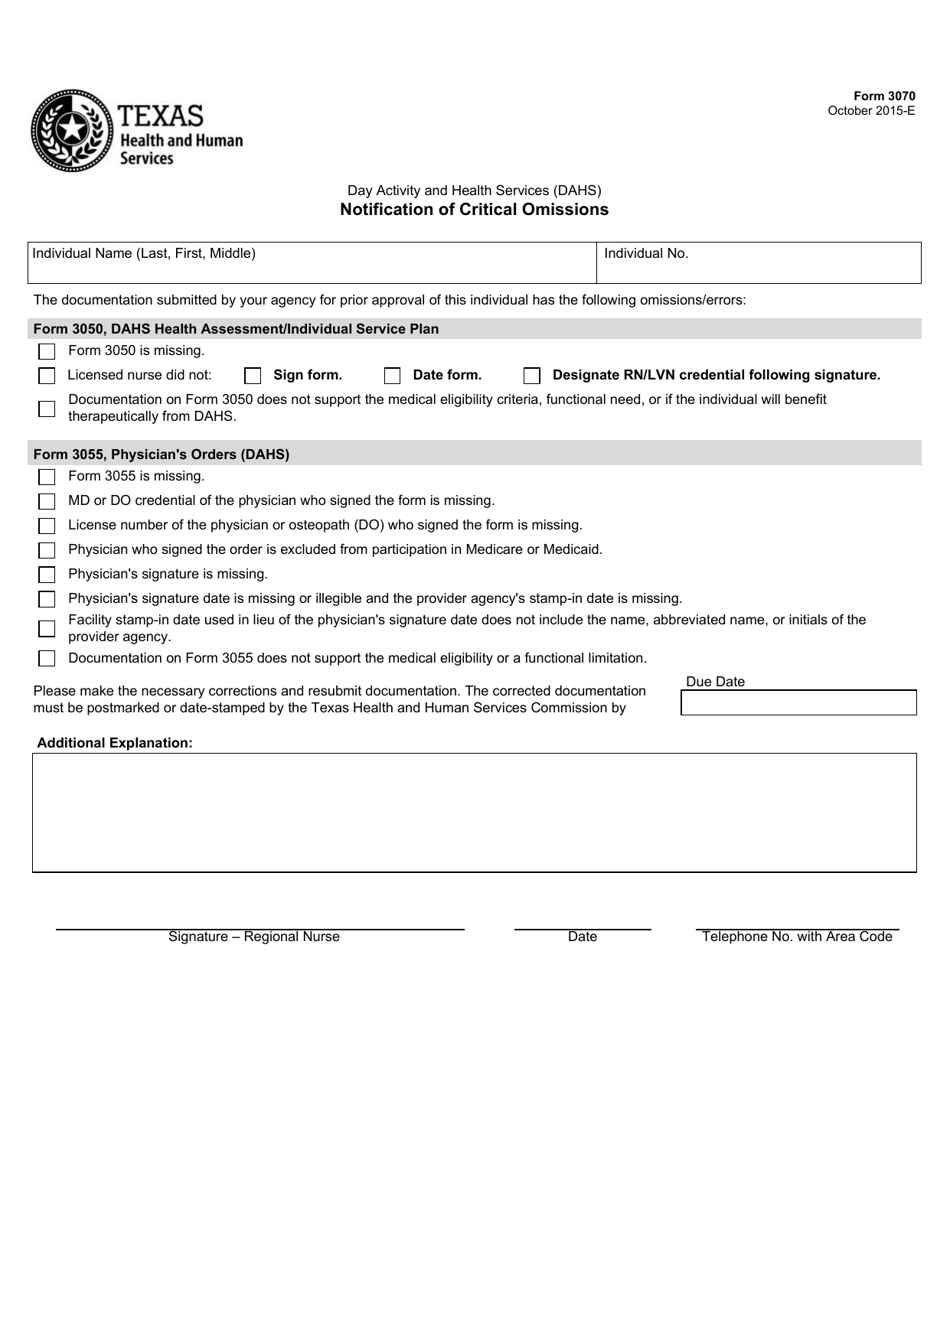 Form 3070 Day Activity and Health Services (Dahs) Notification of Critical Omissions - Texas, Page 1